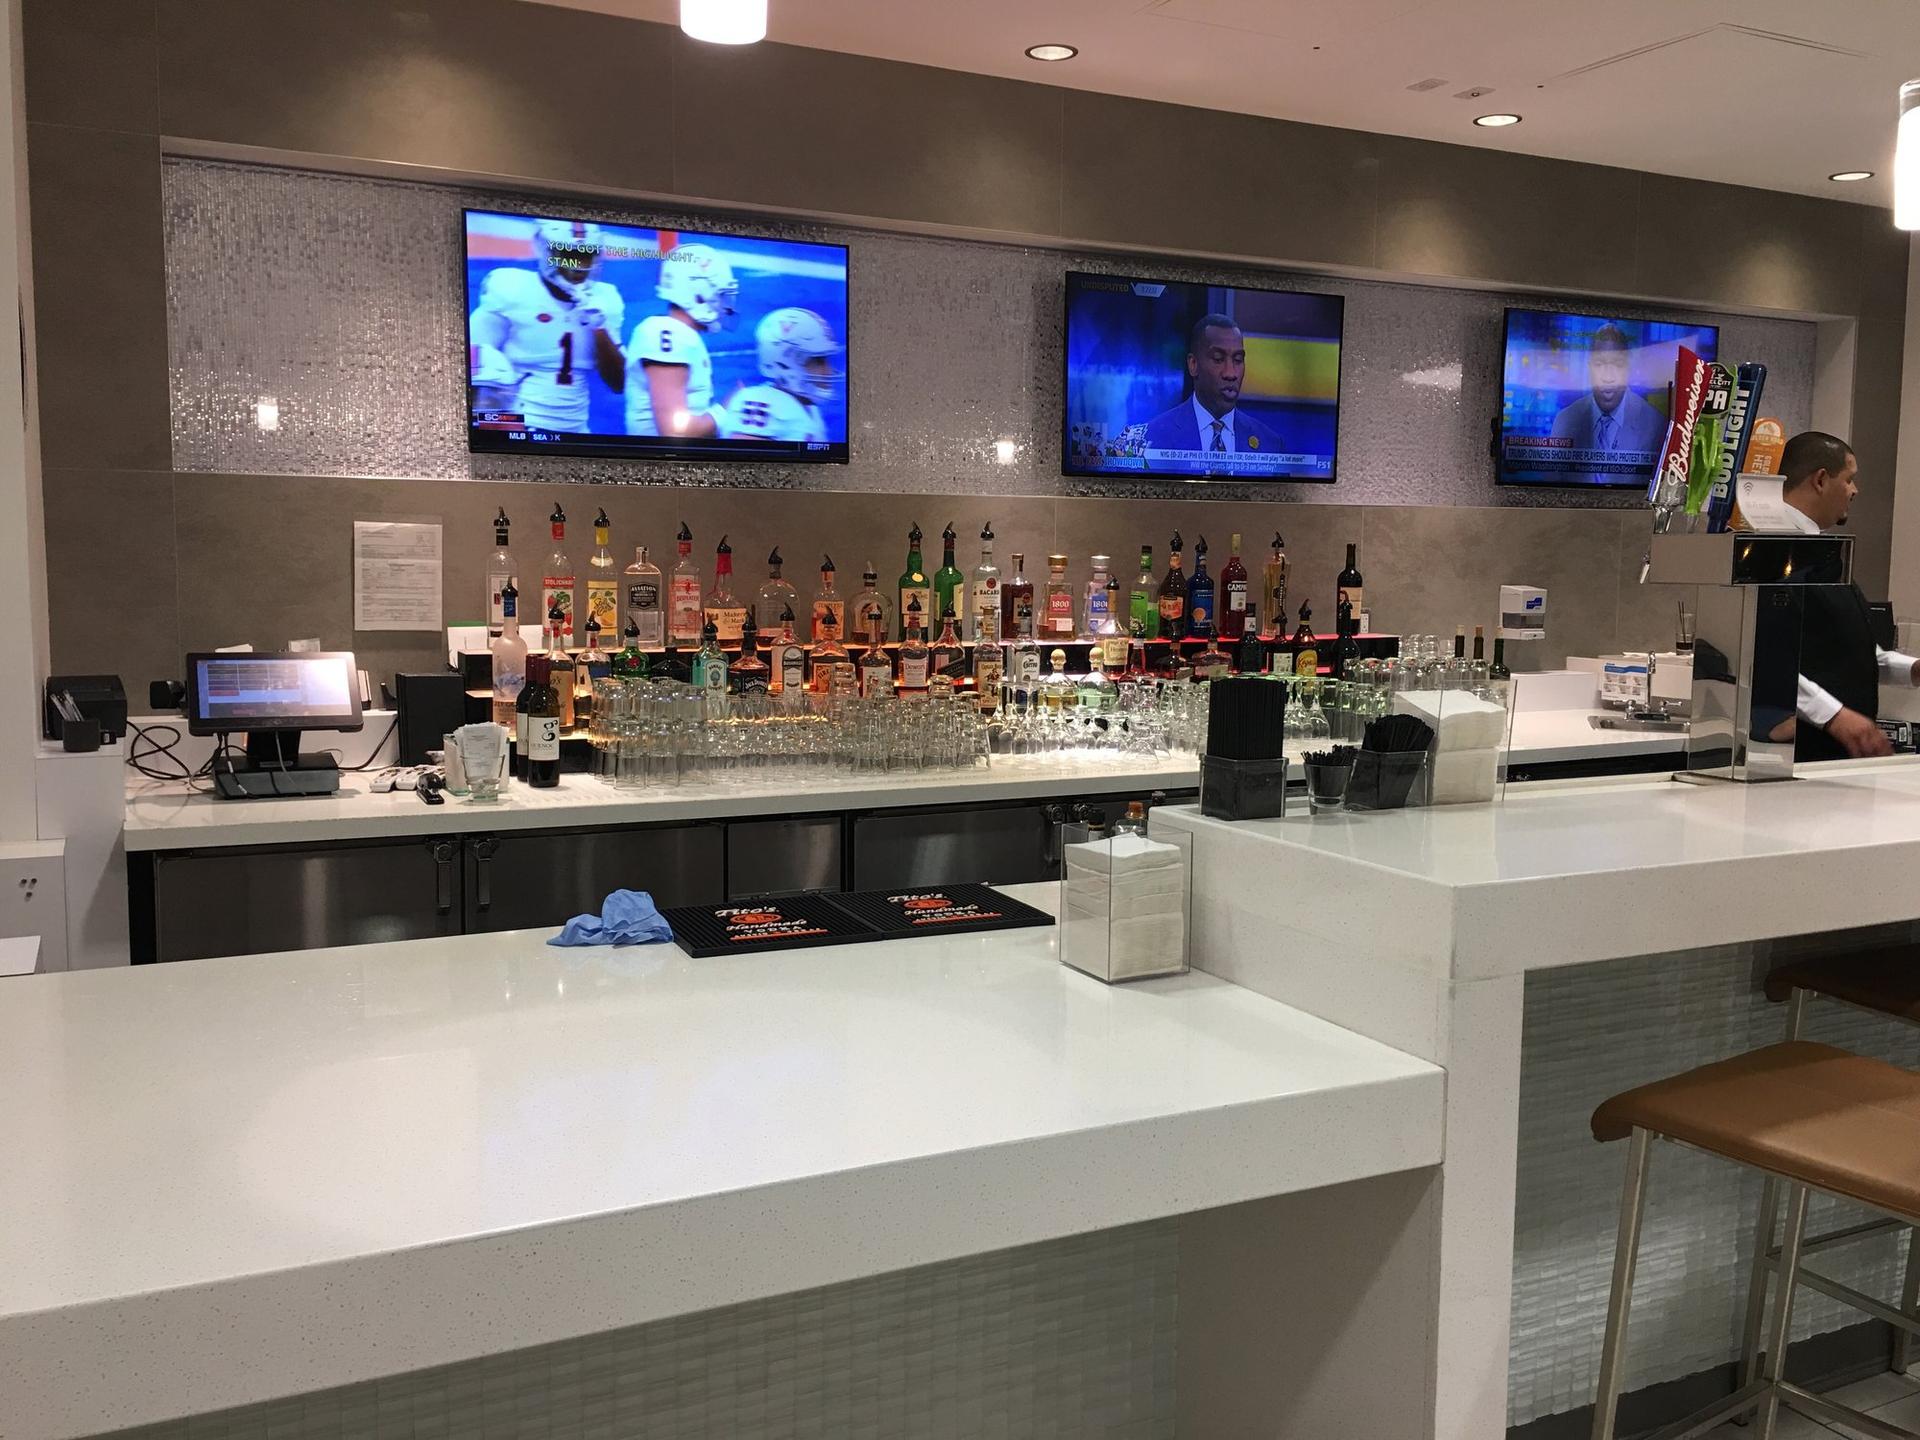 American Airlines Admirals Club image 20 of 38